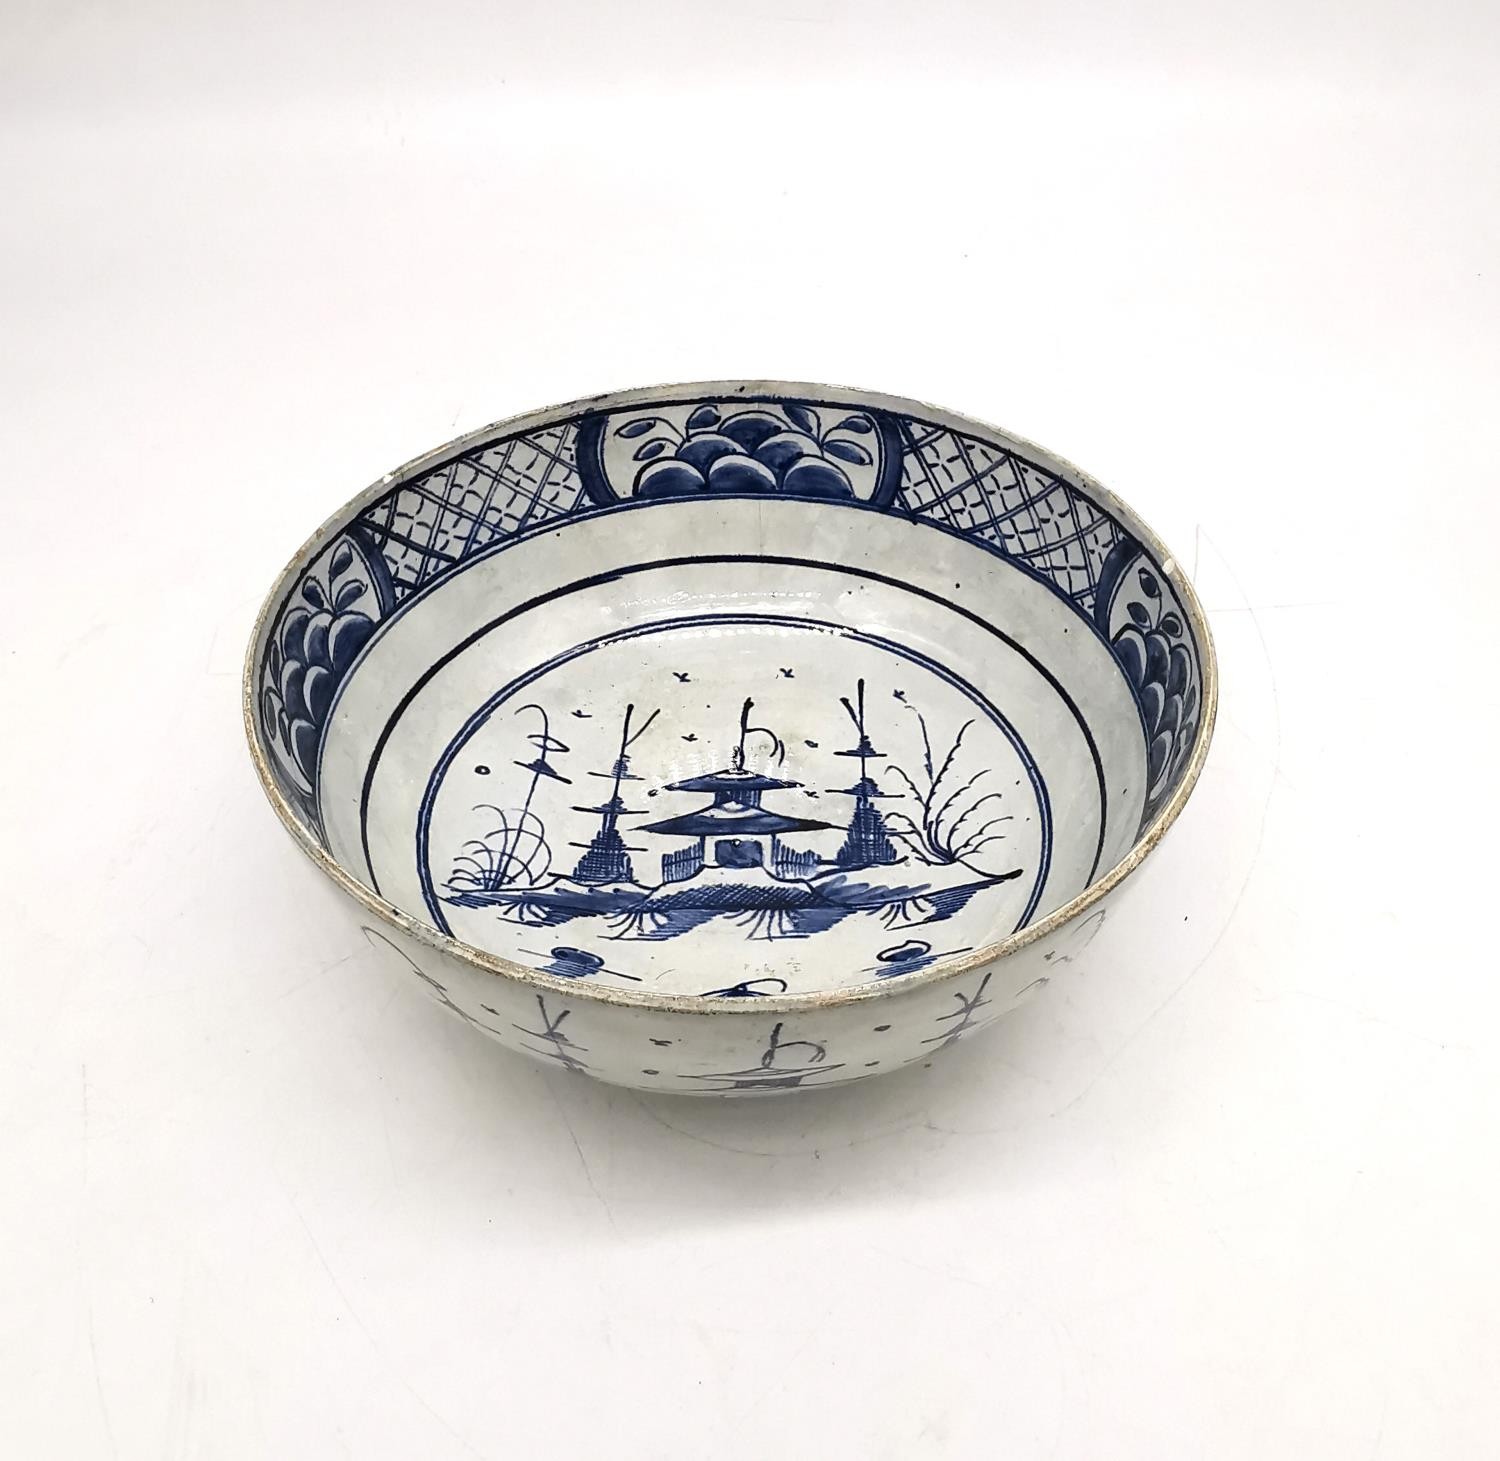 A 18th century Delft blue and white Chinese design bowl with pagoda and tree design. (chipped and